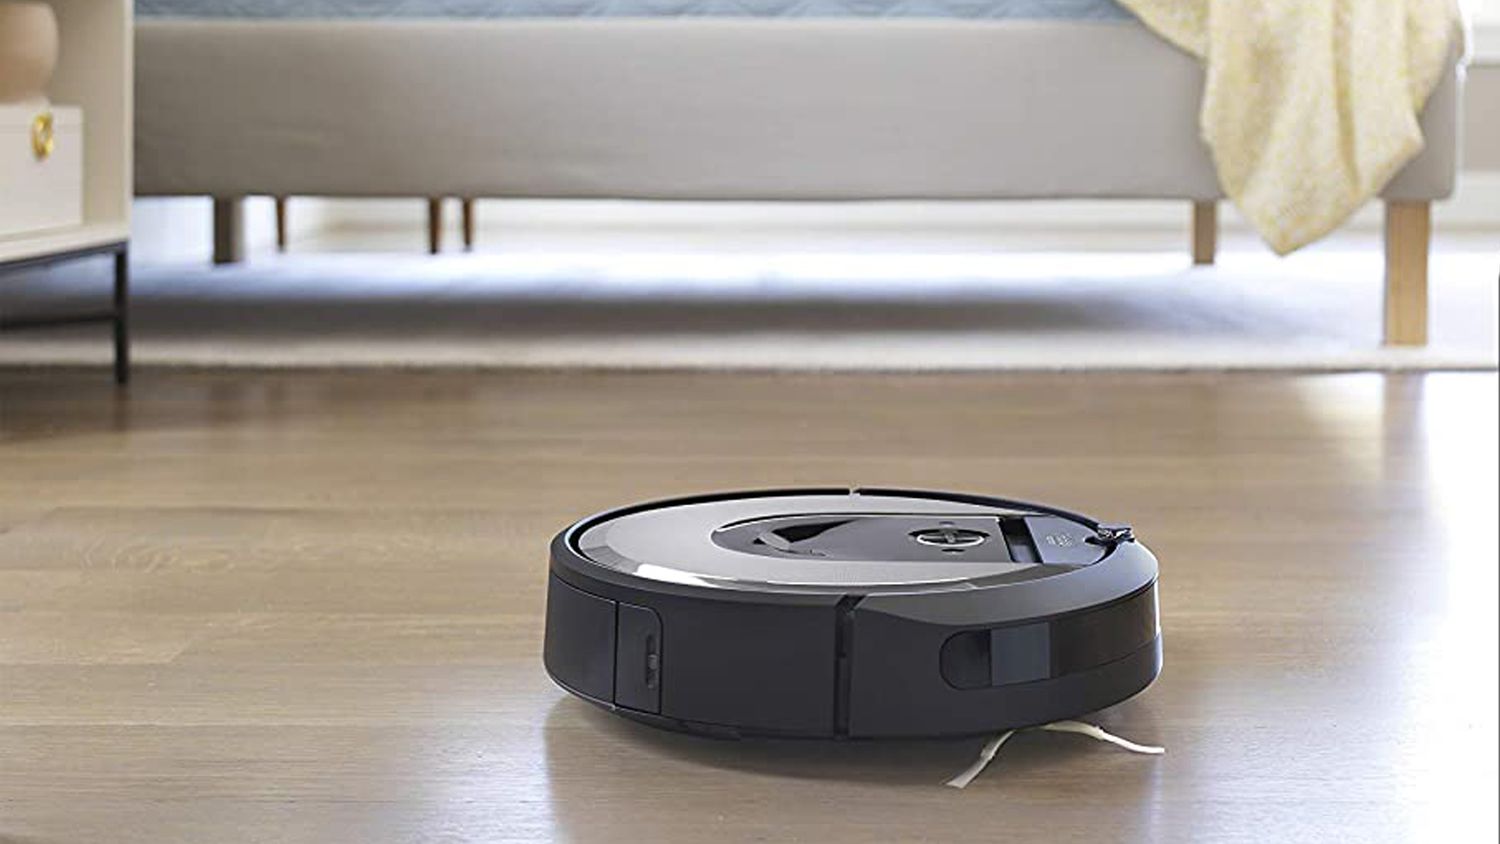 9 Best Robot Vacuums for Hardwood Floors, According to Reviews | Real Simple